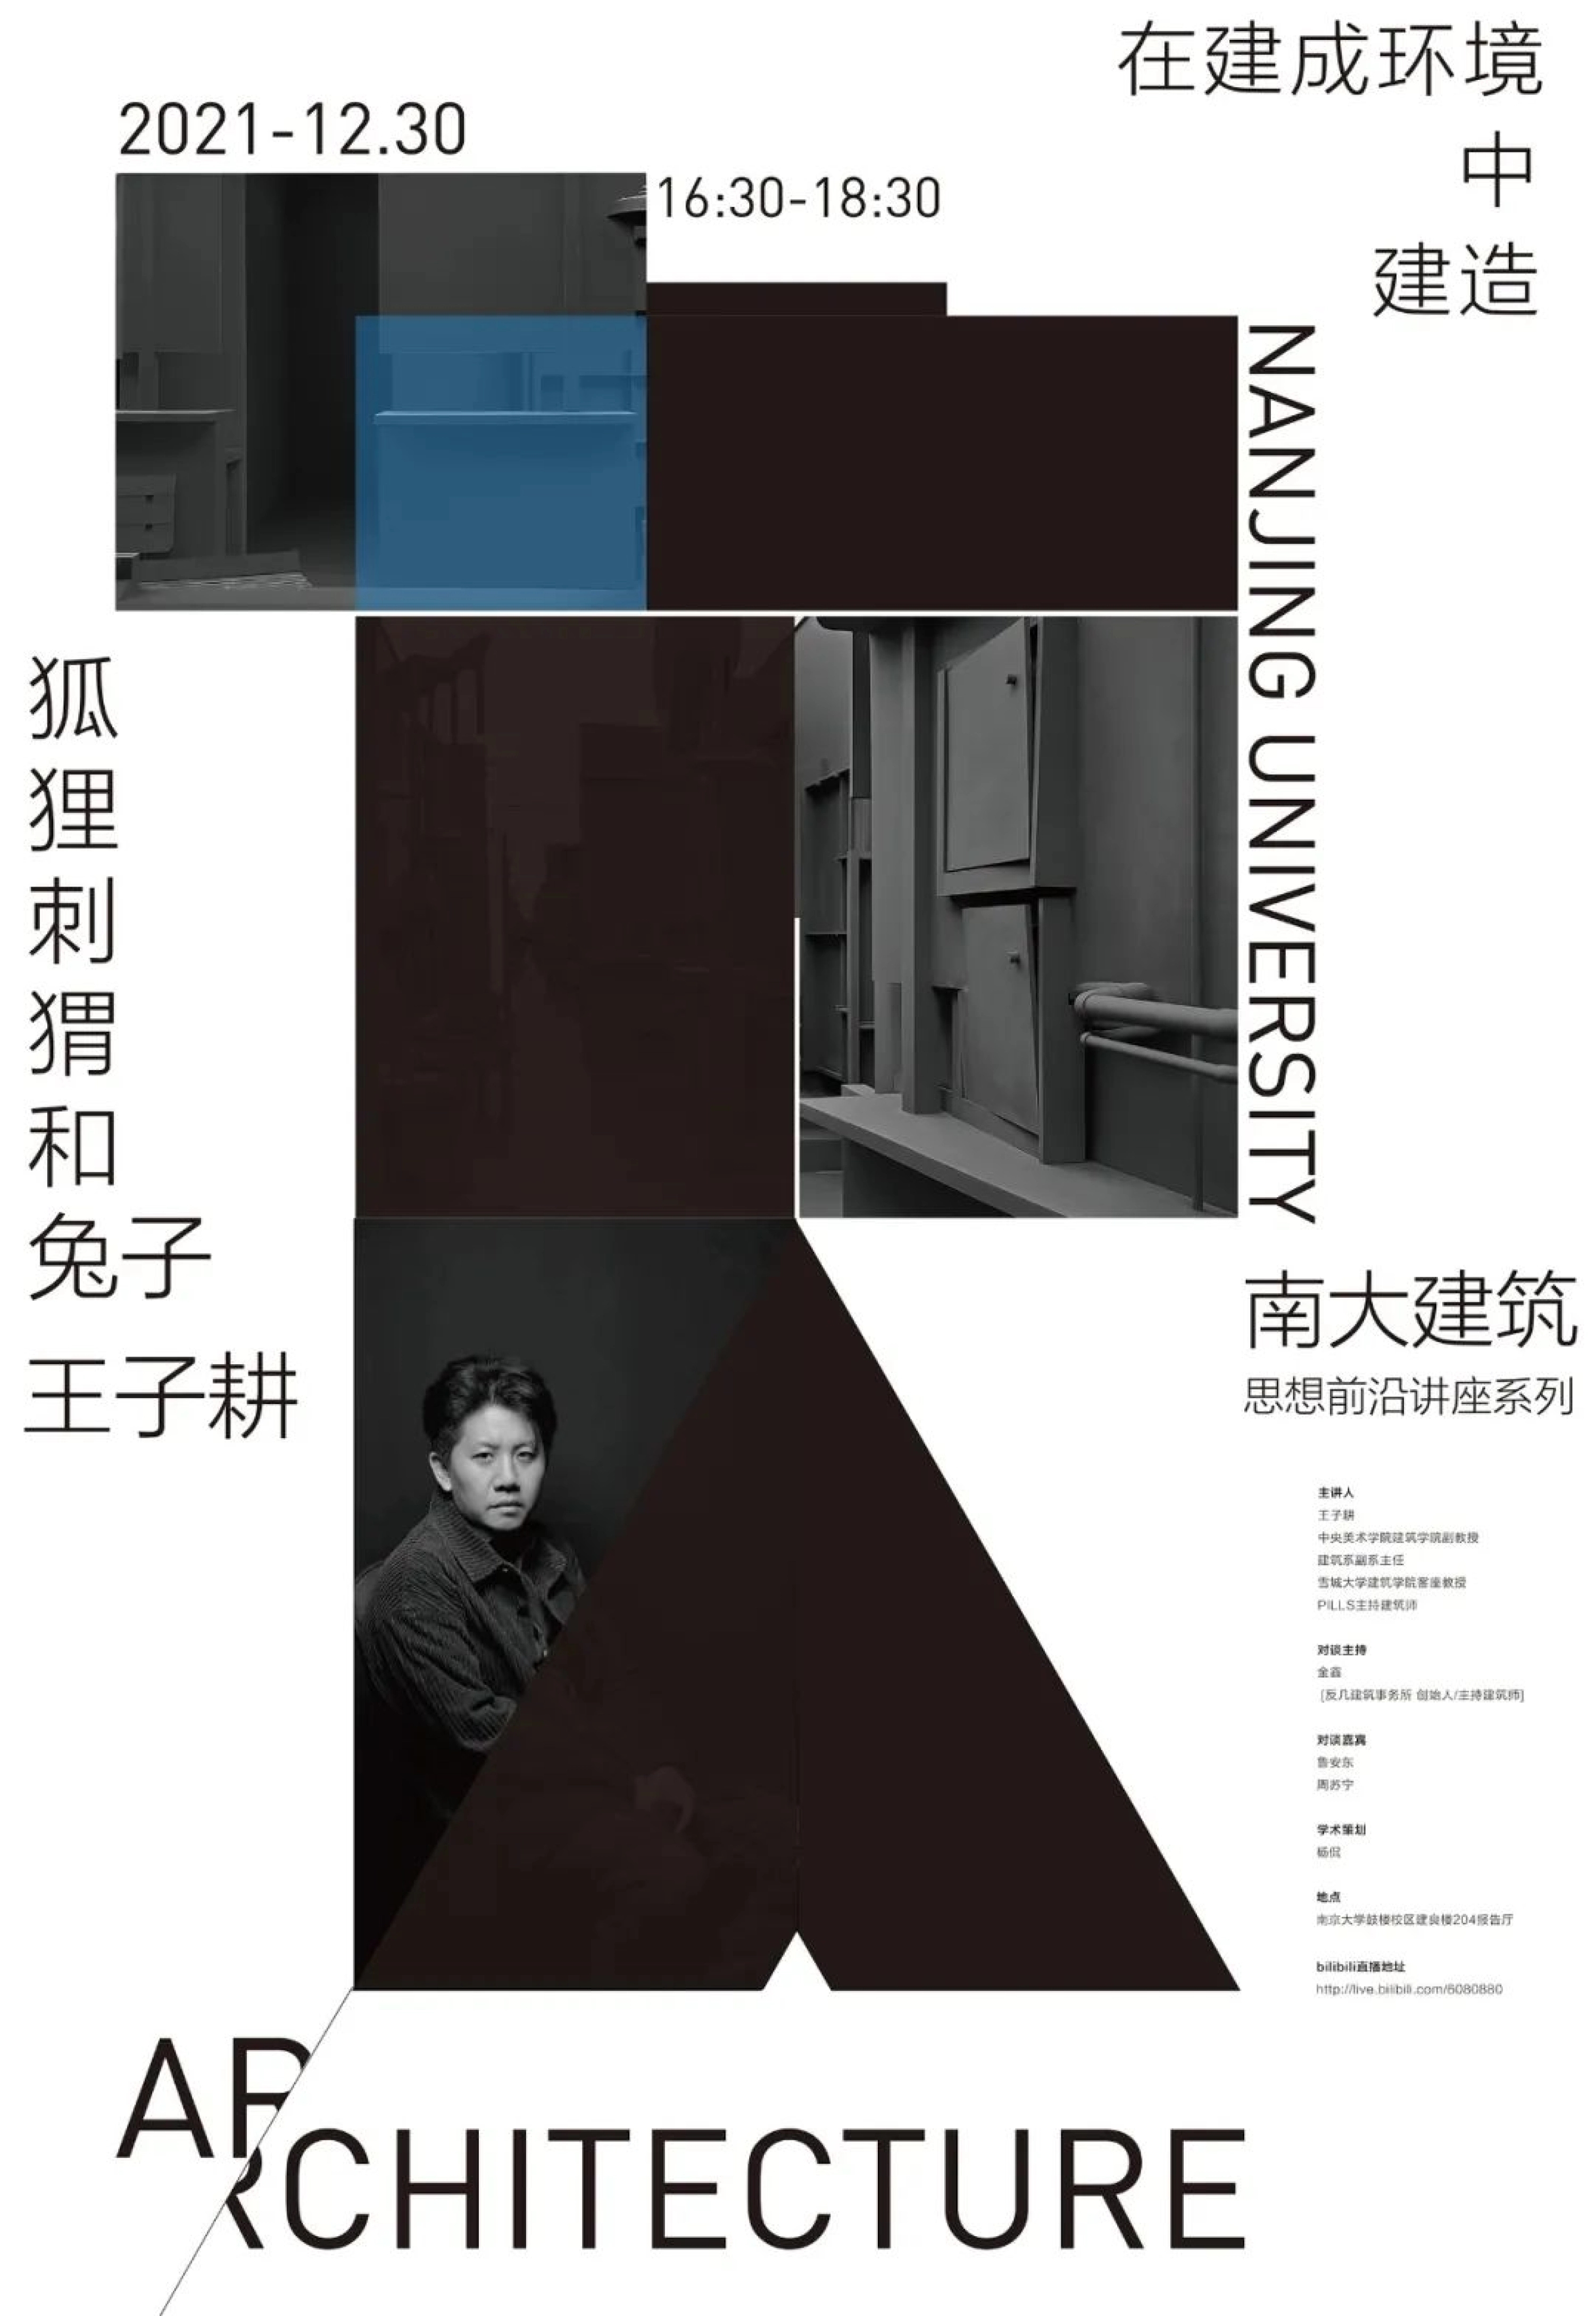 Zigeng Wang was Invited to Give a Lecture on “Building in the Built" at Nanjing University